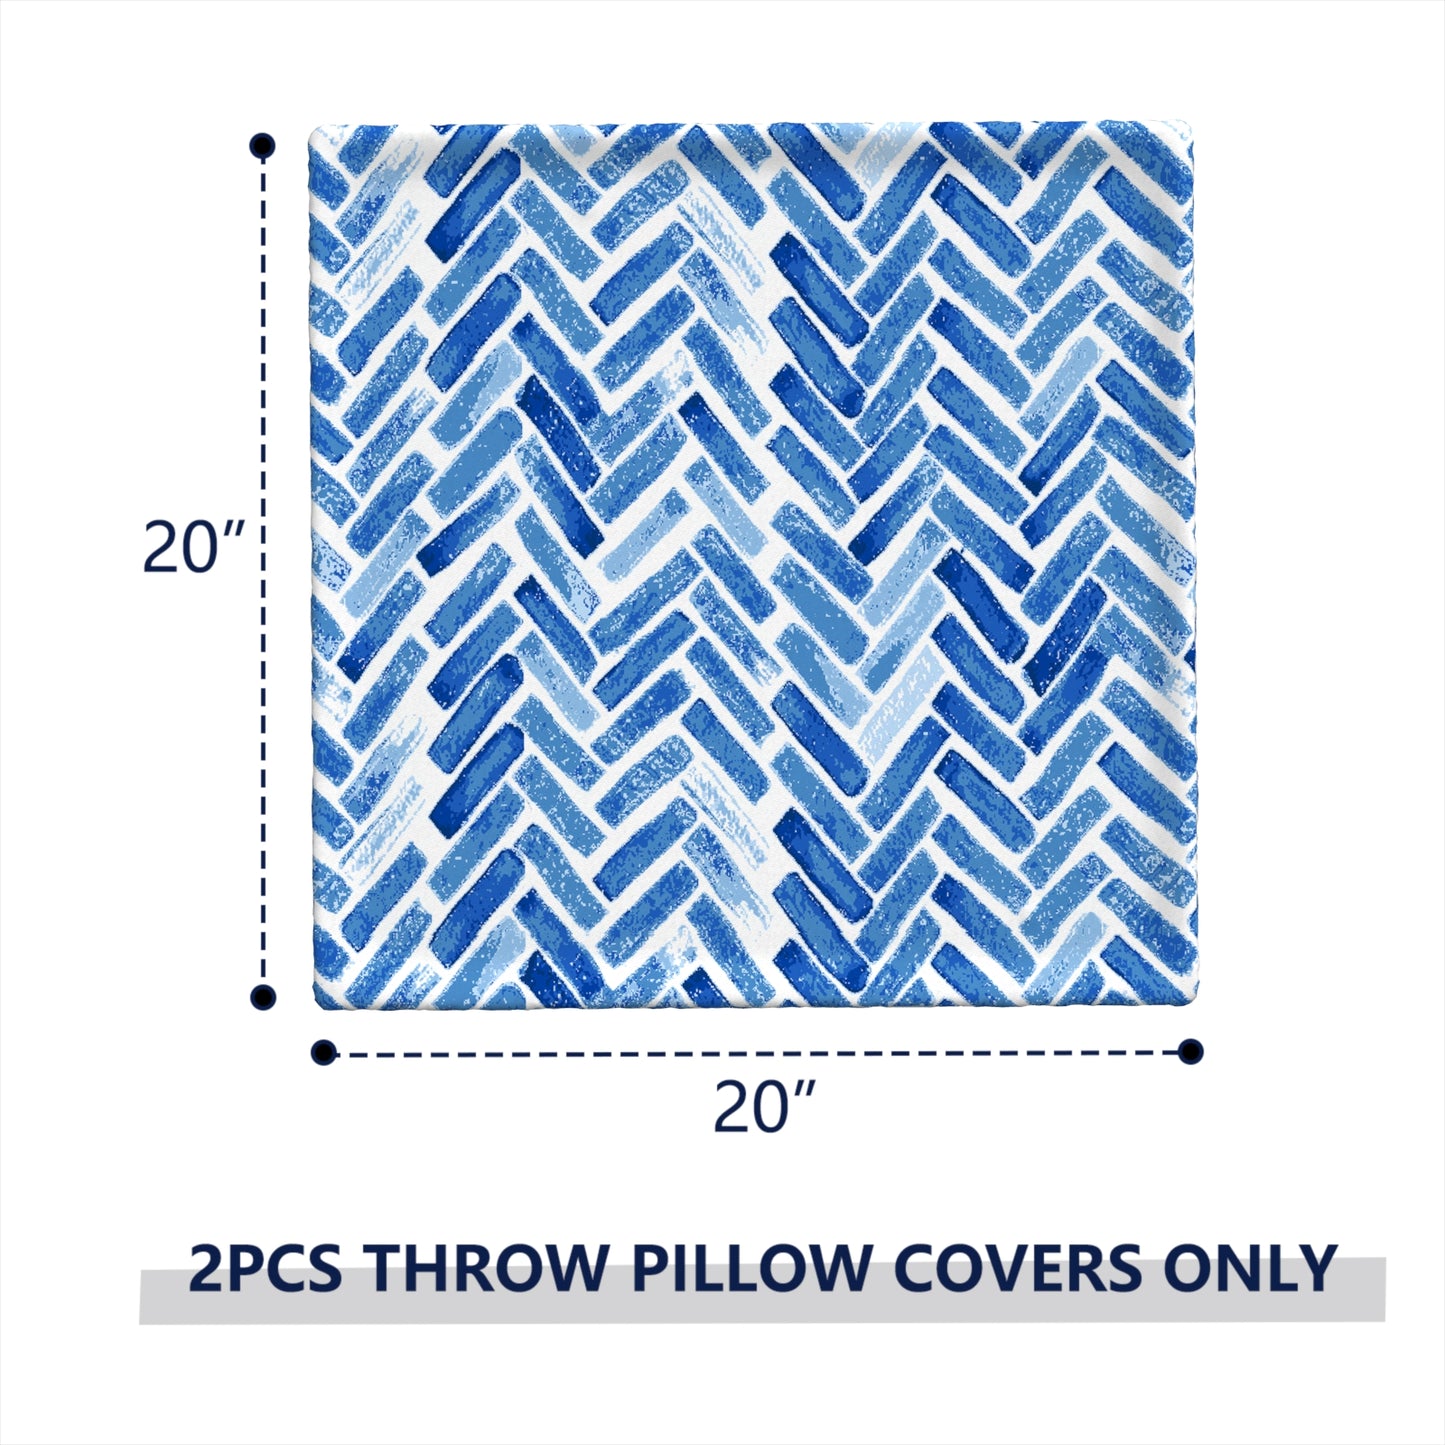 Melody Elephant Pack of 2 Patio Throw Pillow Covers ONLY, Water Repellent Cushion Cases 20x20 Inch, Square Pillowcases for Outdoor Couch Decoration, Blue Bricks